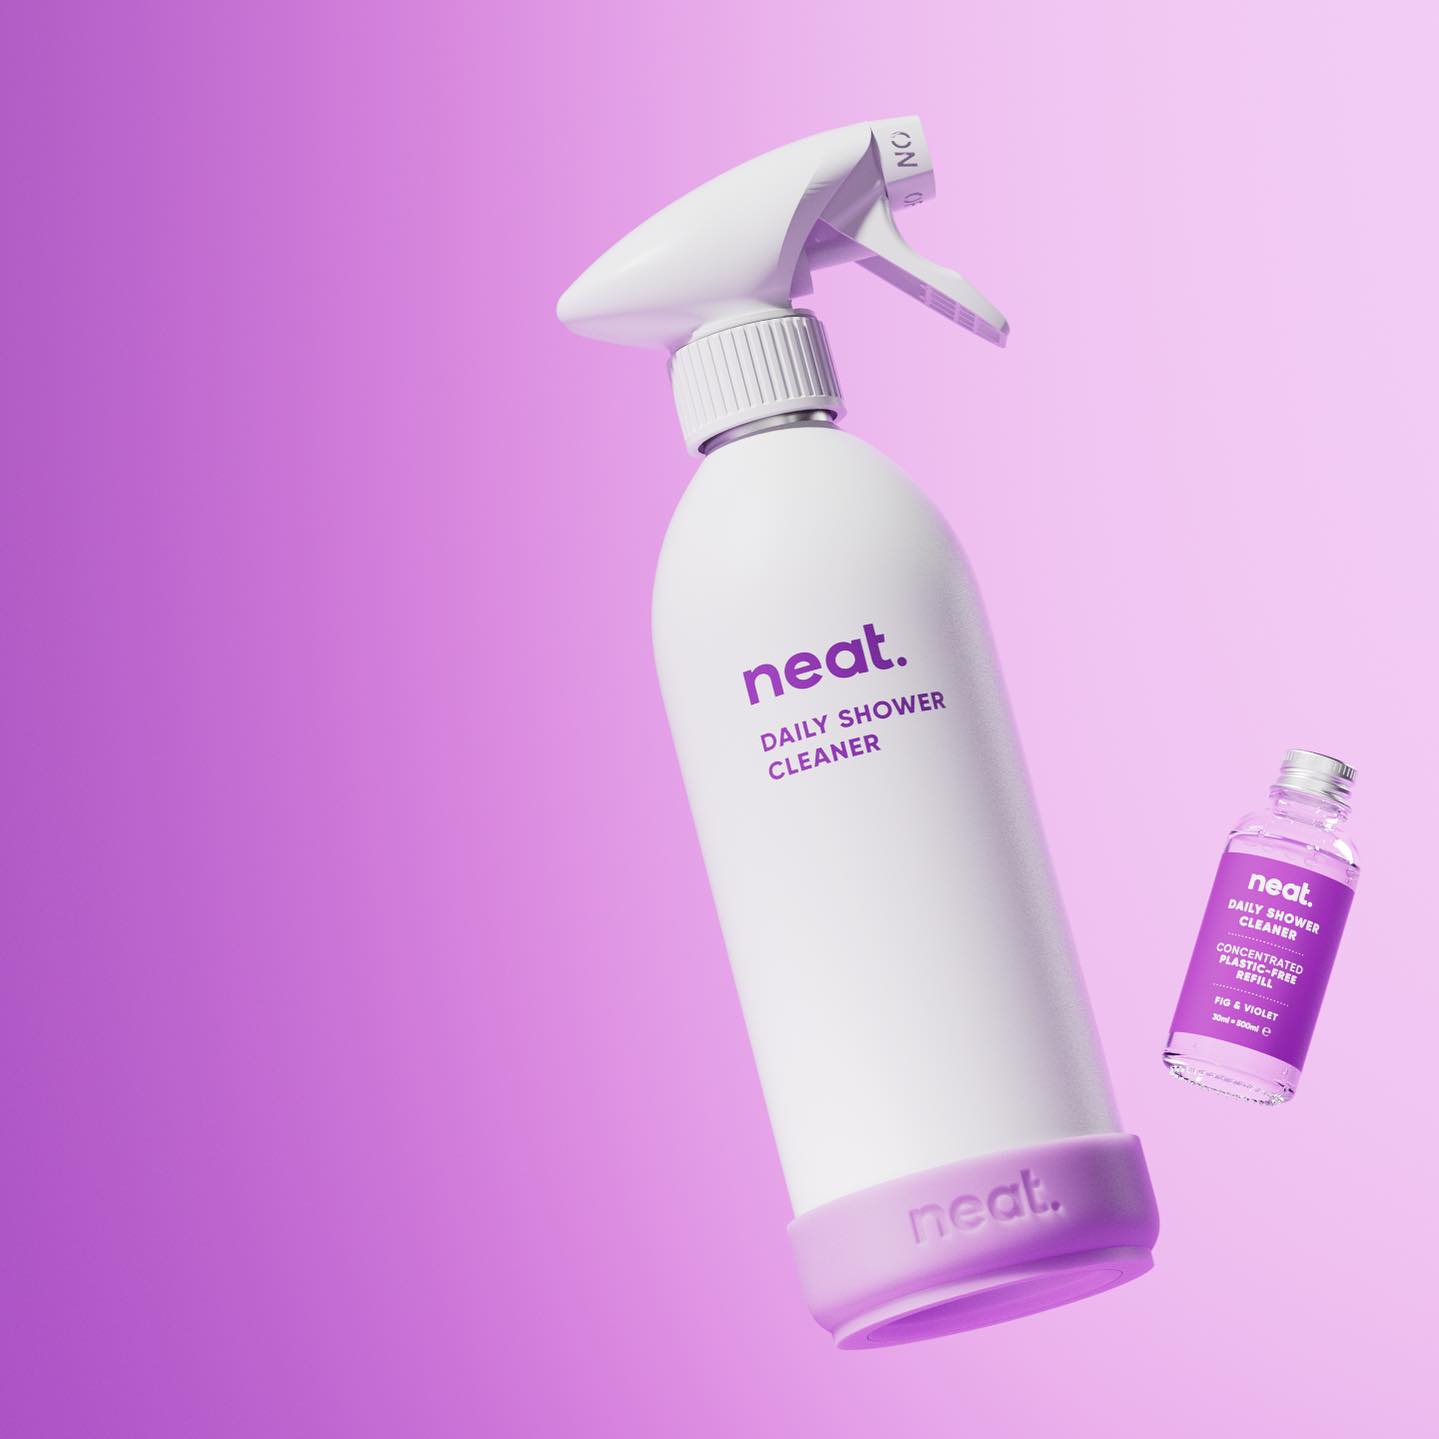 neat. Household Cleaning Products Neat Daily Shower Cleaner Starter Pack 500ml - Violet & Fig